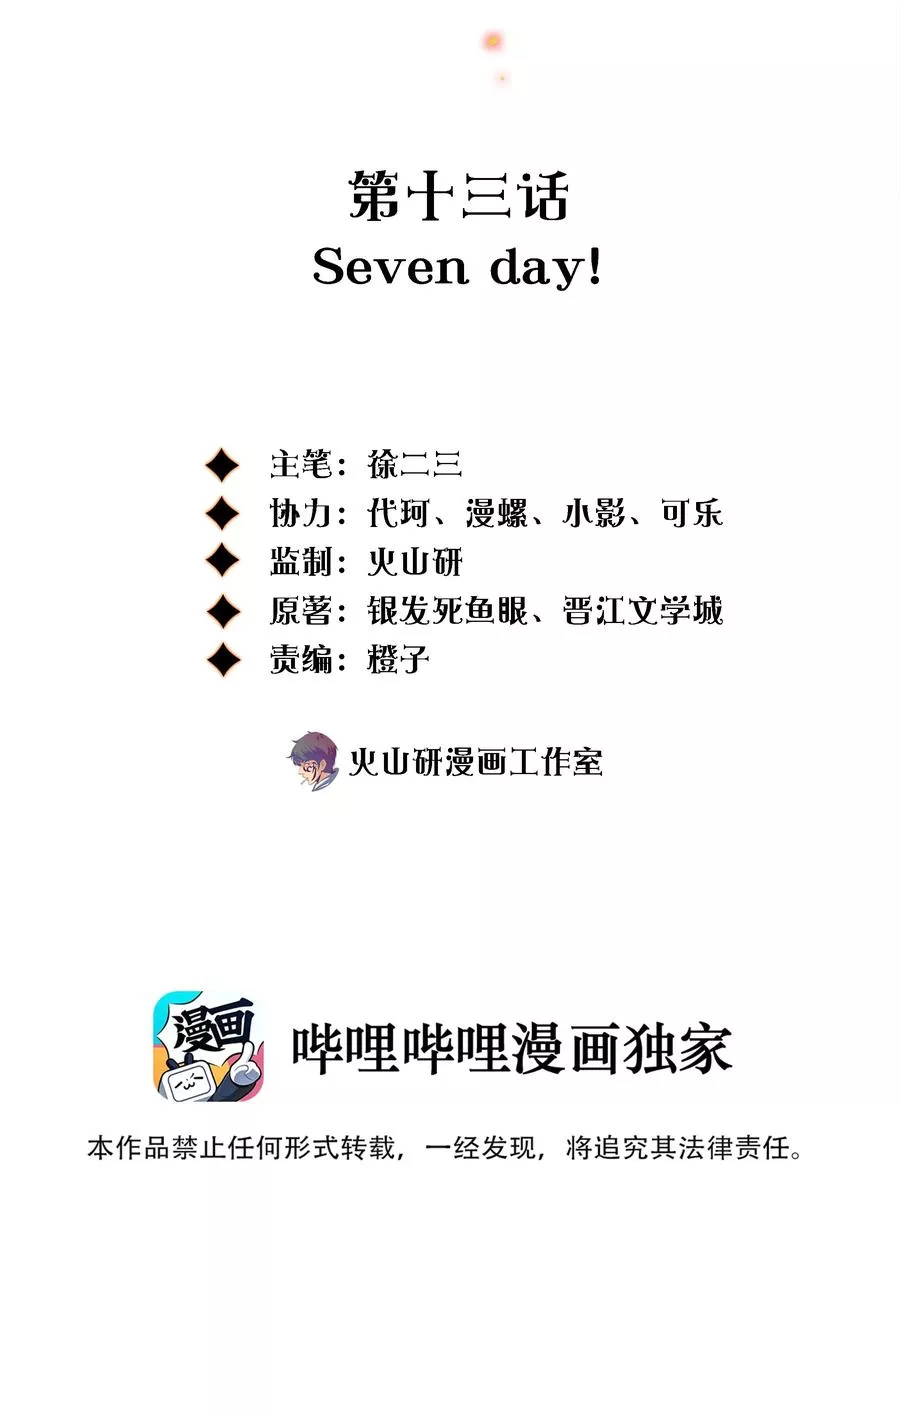 013 Seven day!1